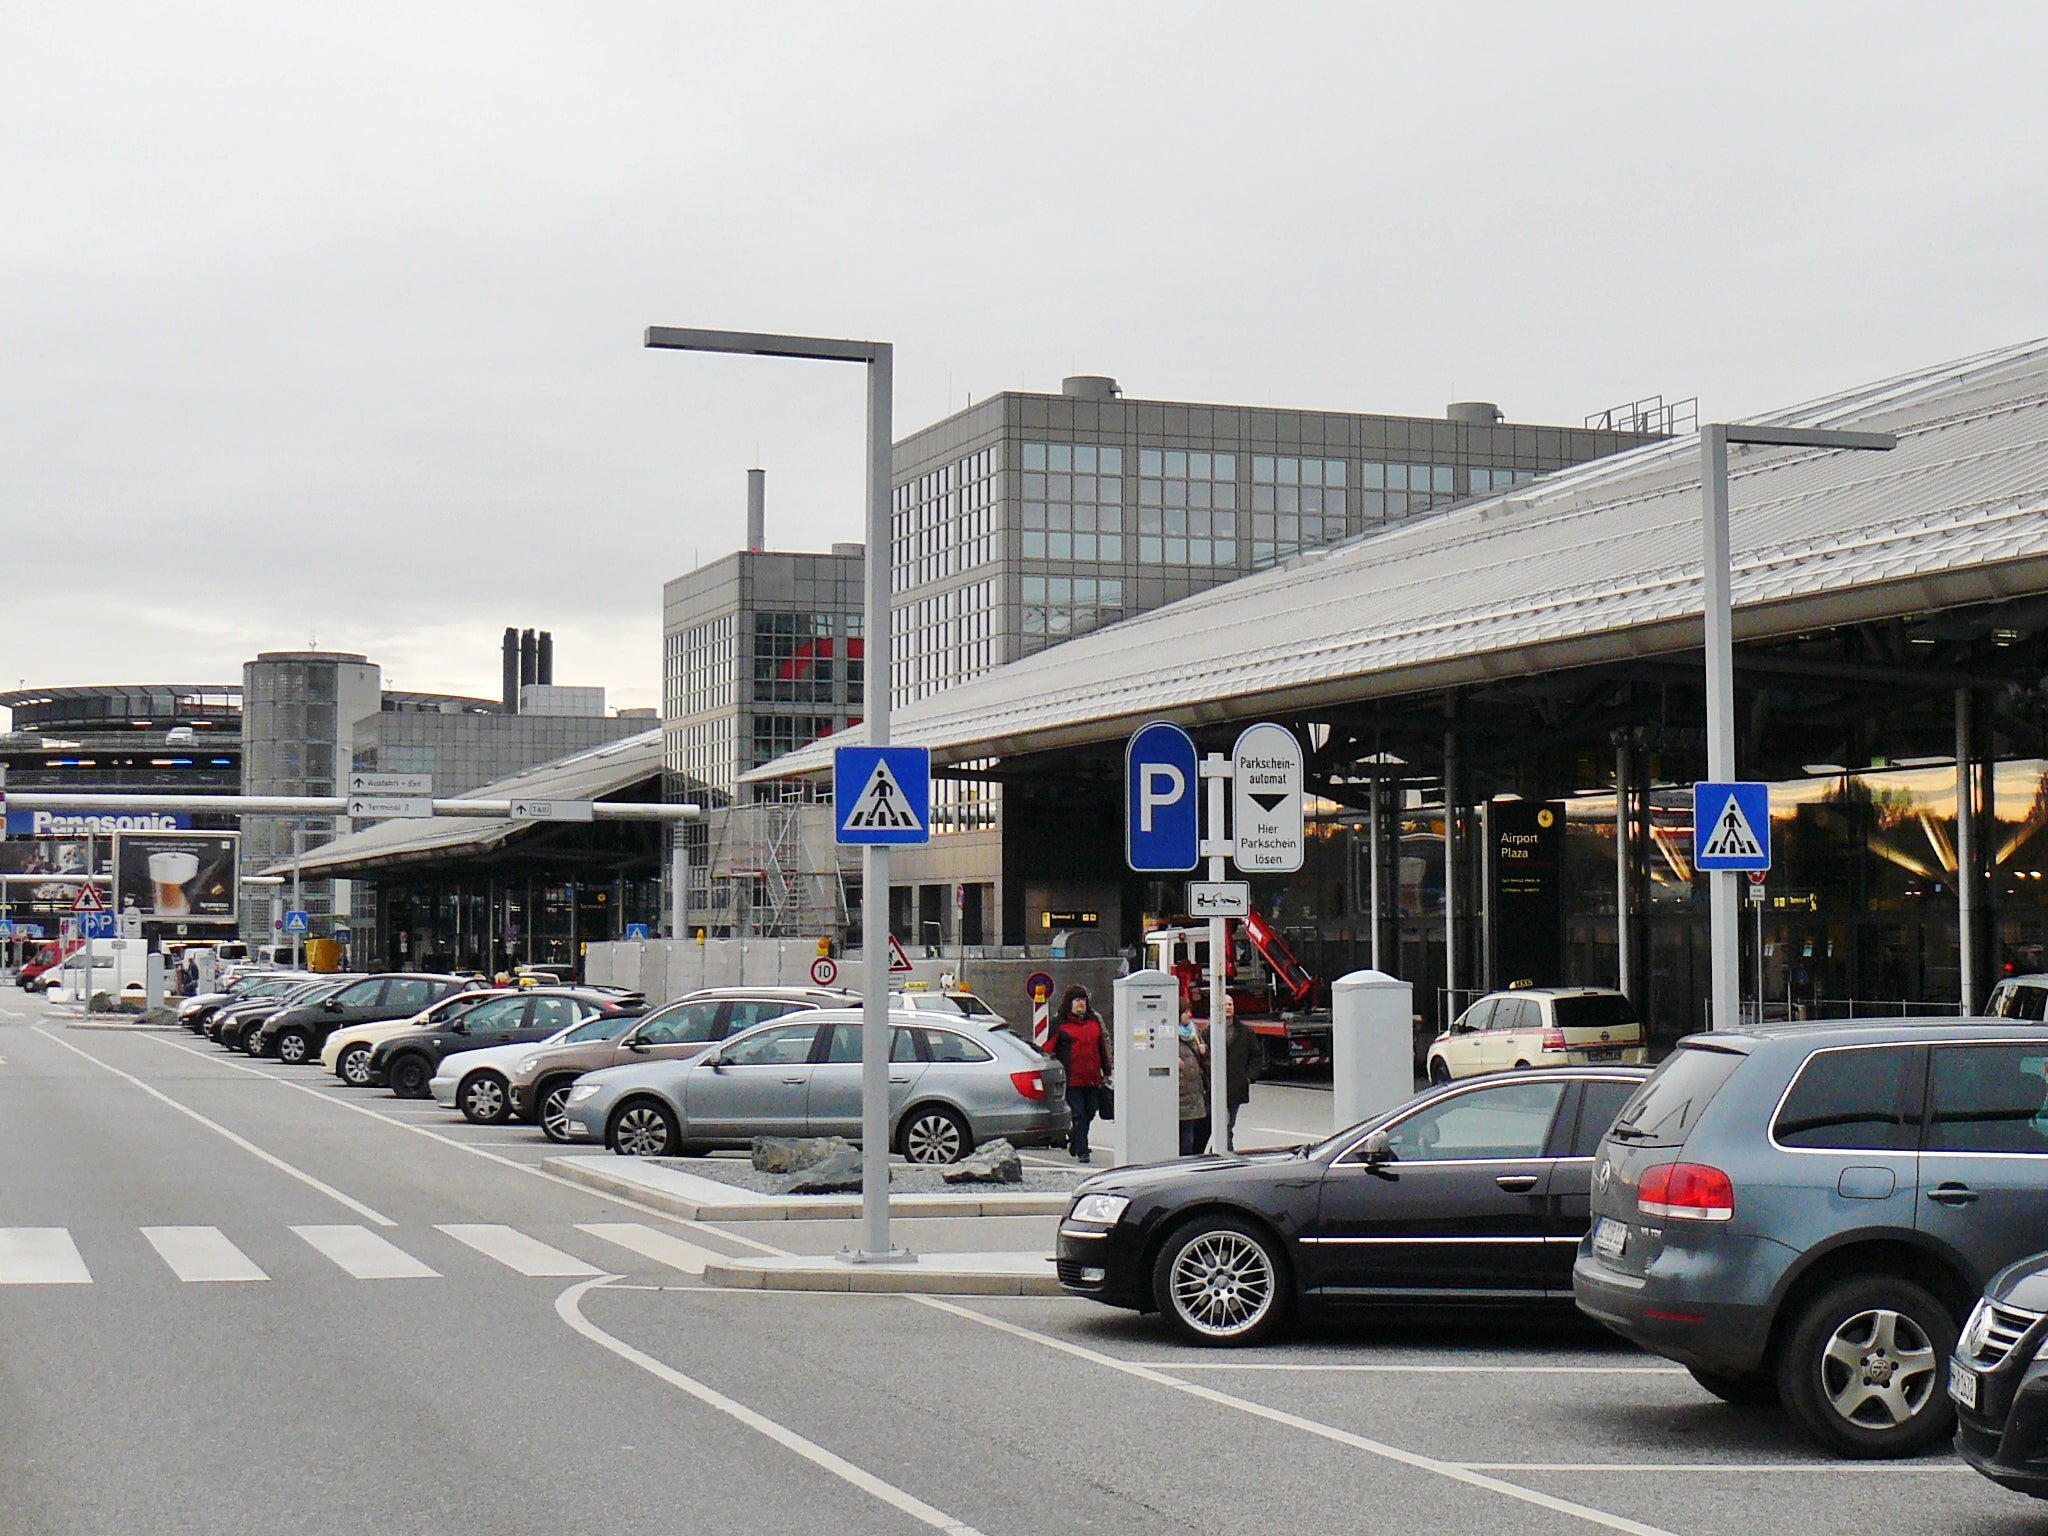 The taxi driver did not find the baby until he picked up a fare at Hamburg airport, above